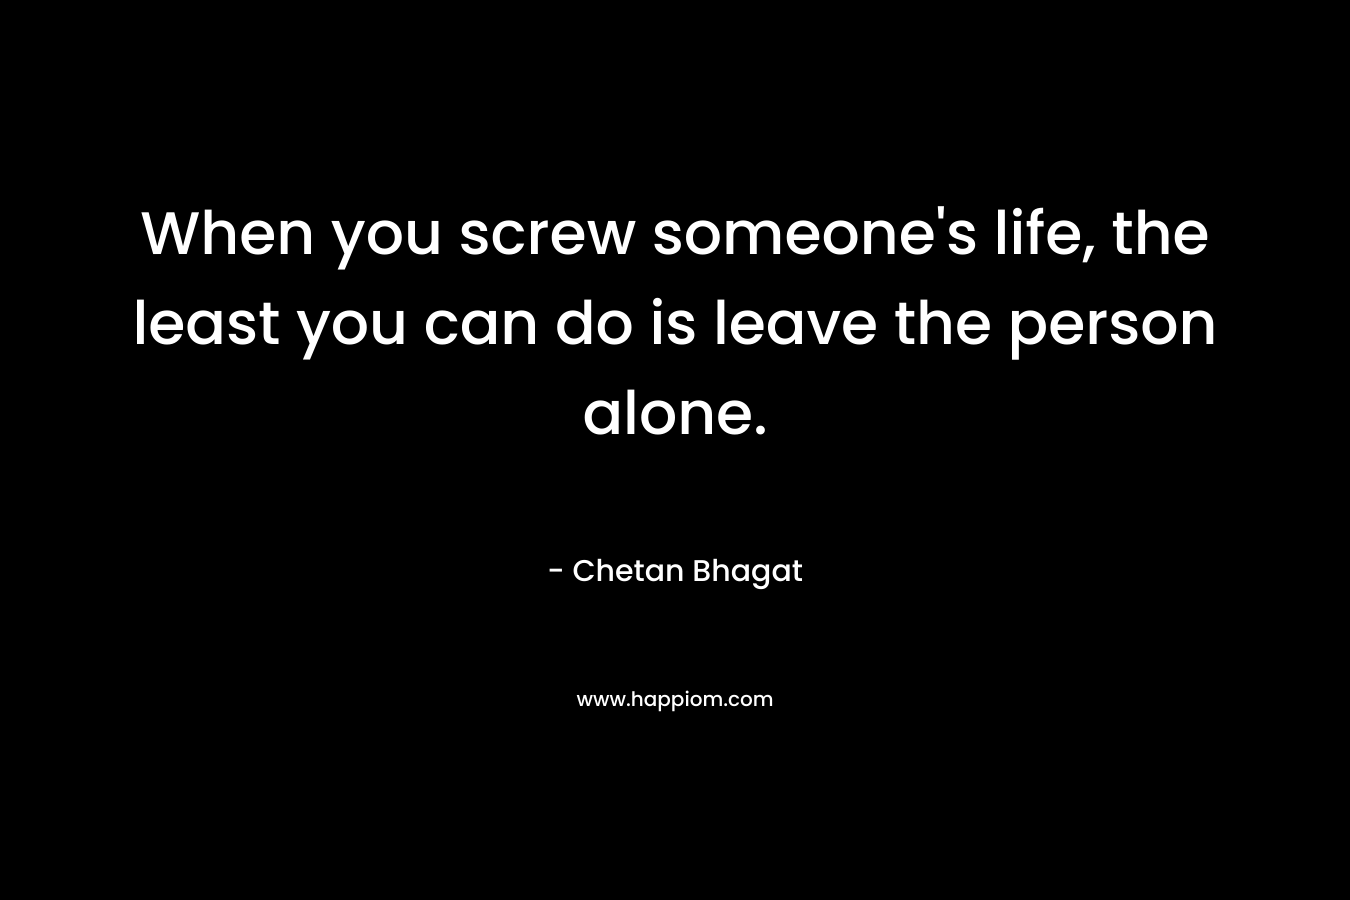 When you screw someone’s life, the least you can do is leave the person alone. – Chetan Bhagat